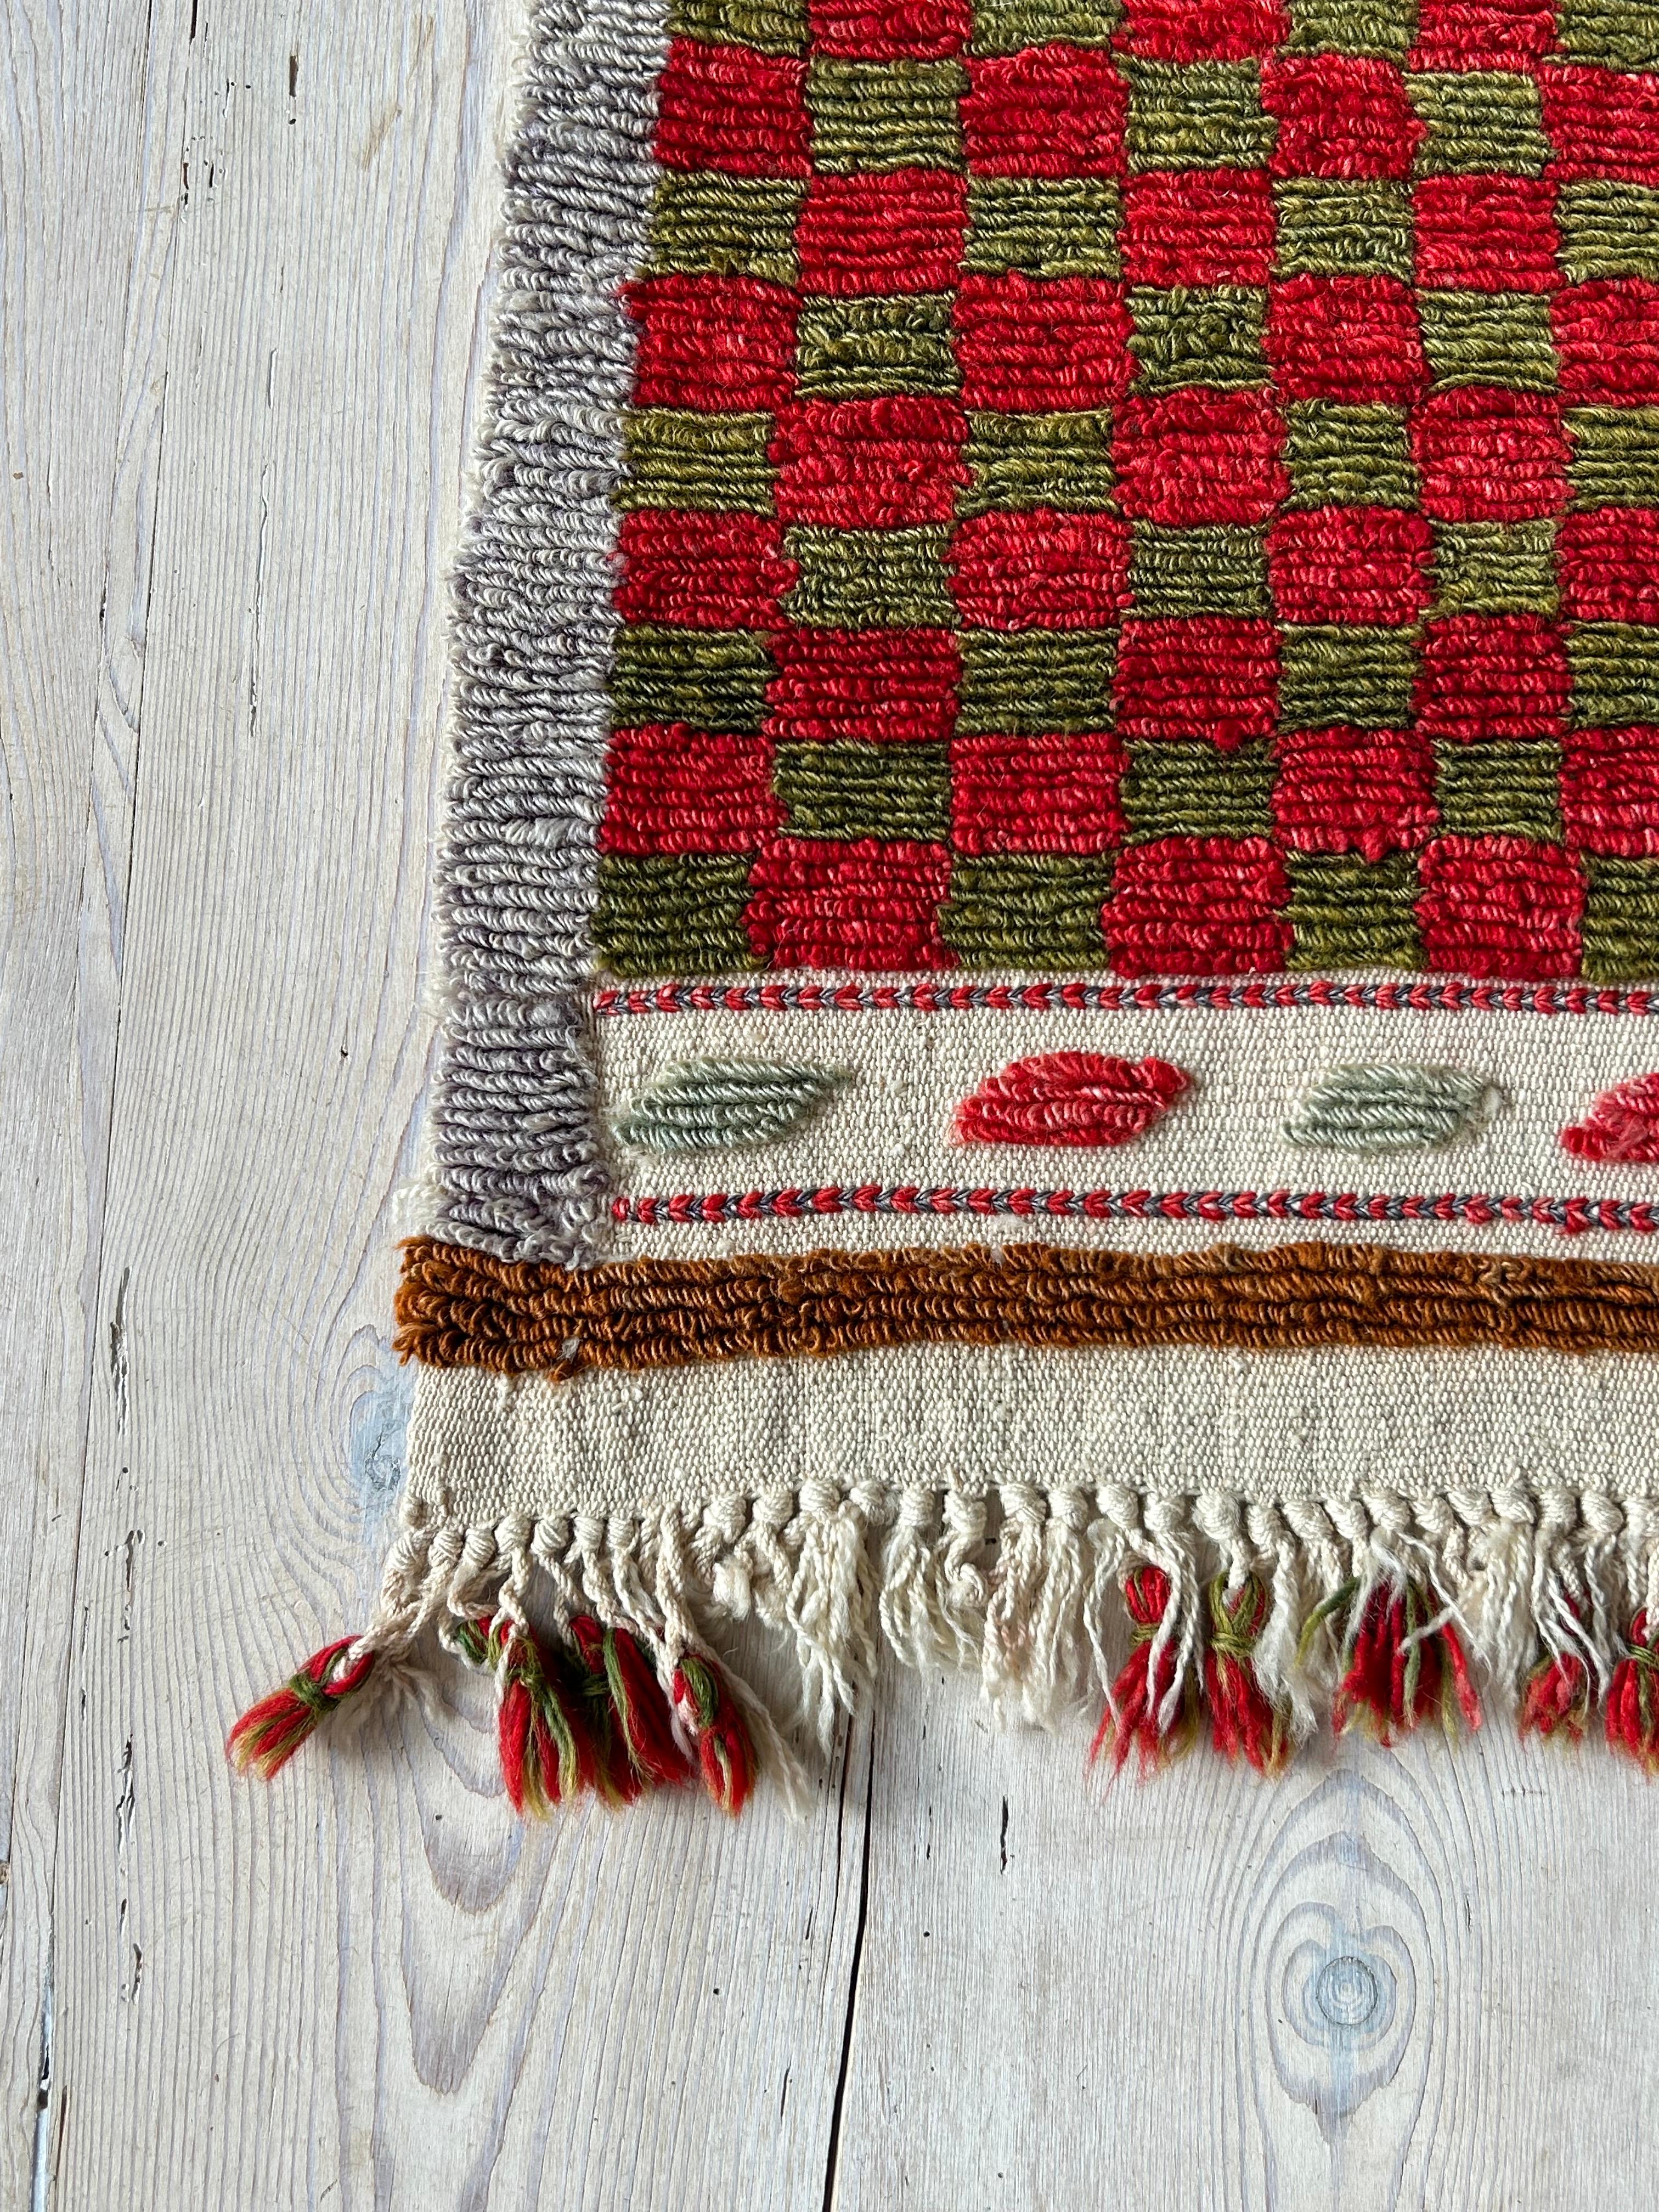 Wool Vintage Angora Loop Pile Rug in Red & Green Check Pattern, Turkey, 20th Century For Sale